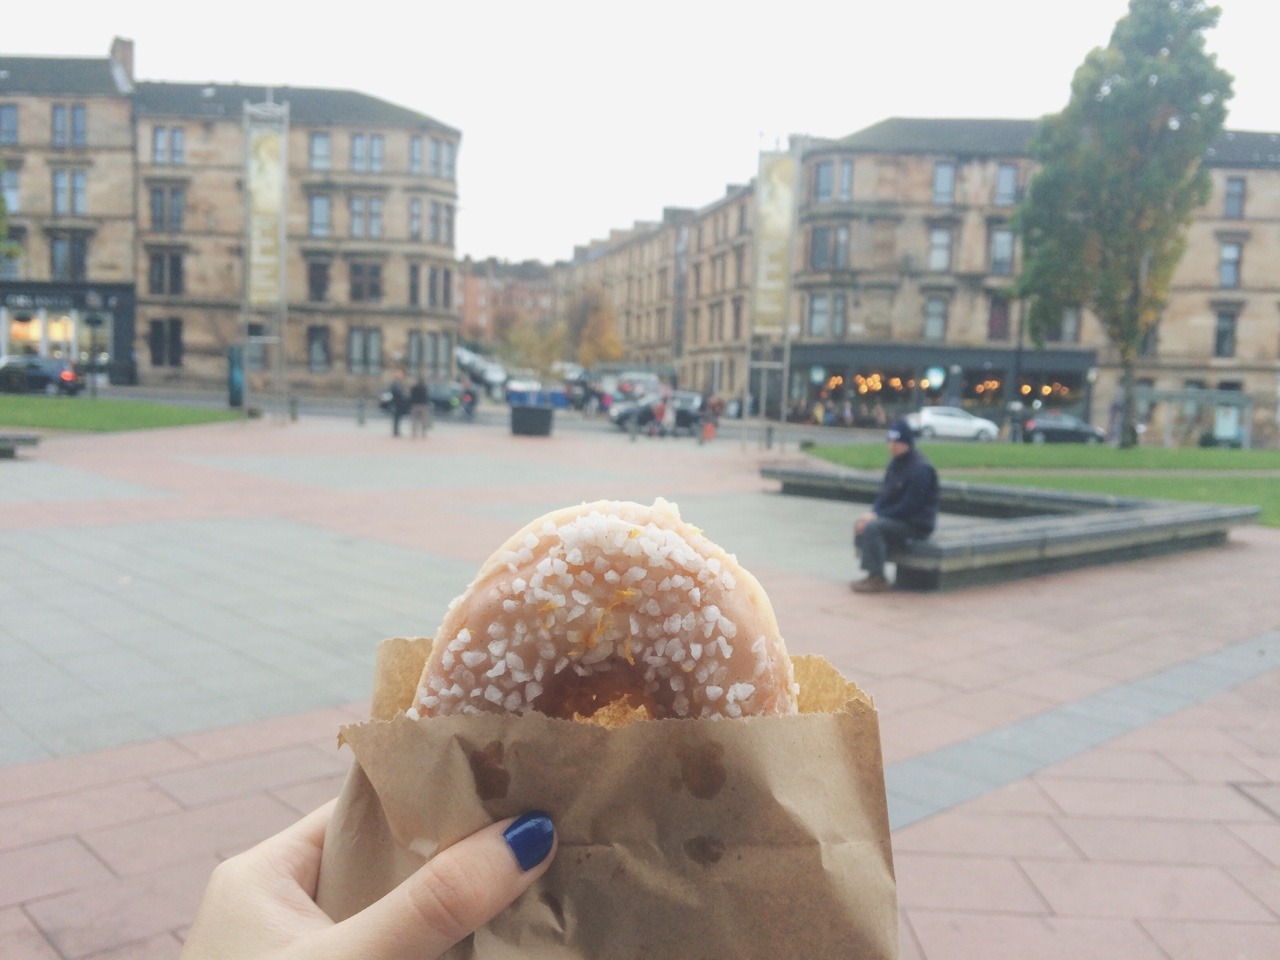 We had doughnuts outside the museum while waiting for Ken Fui